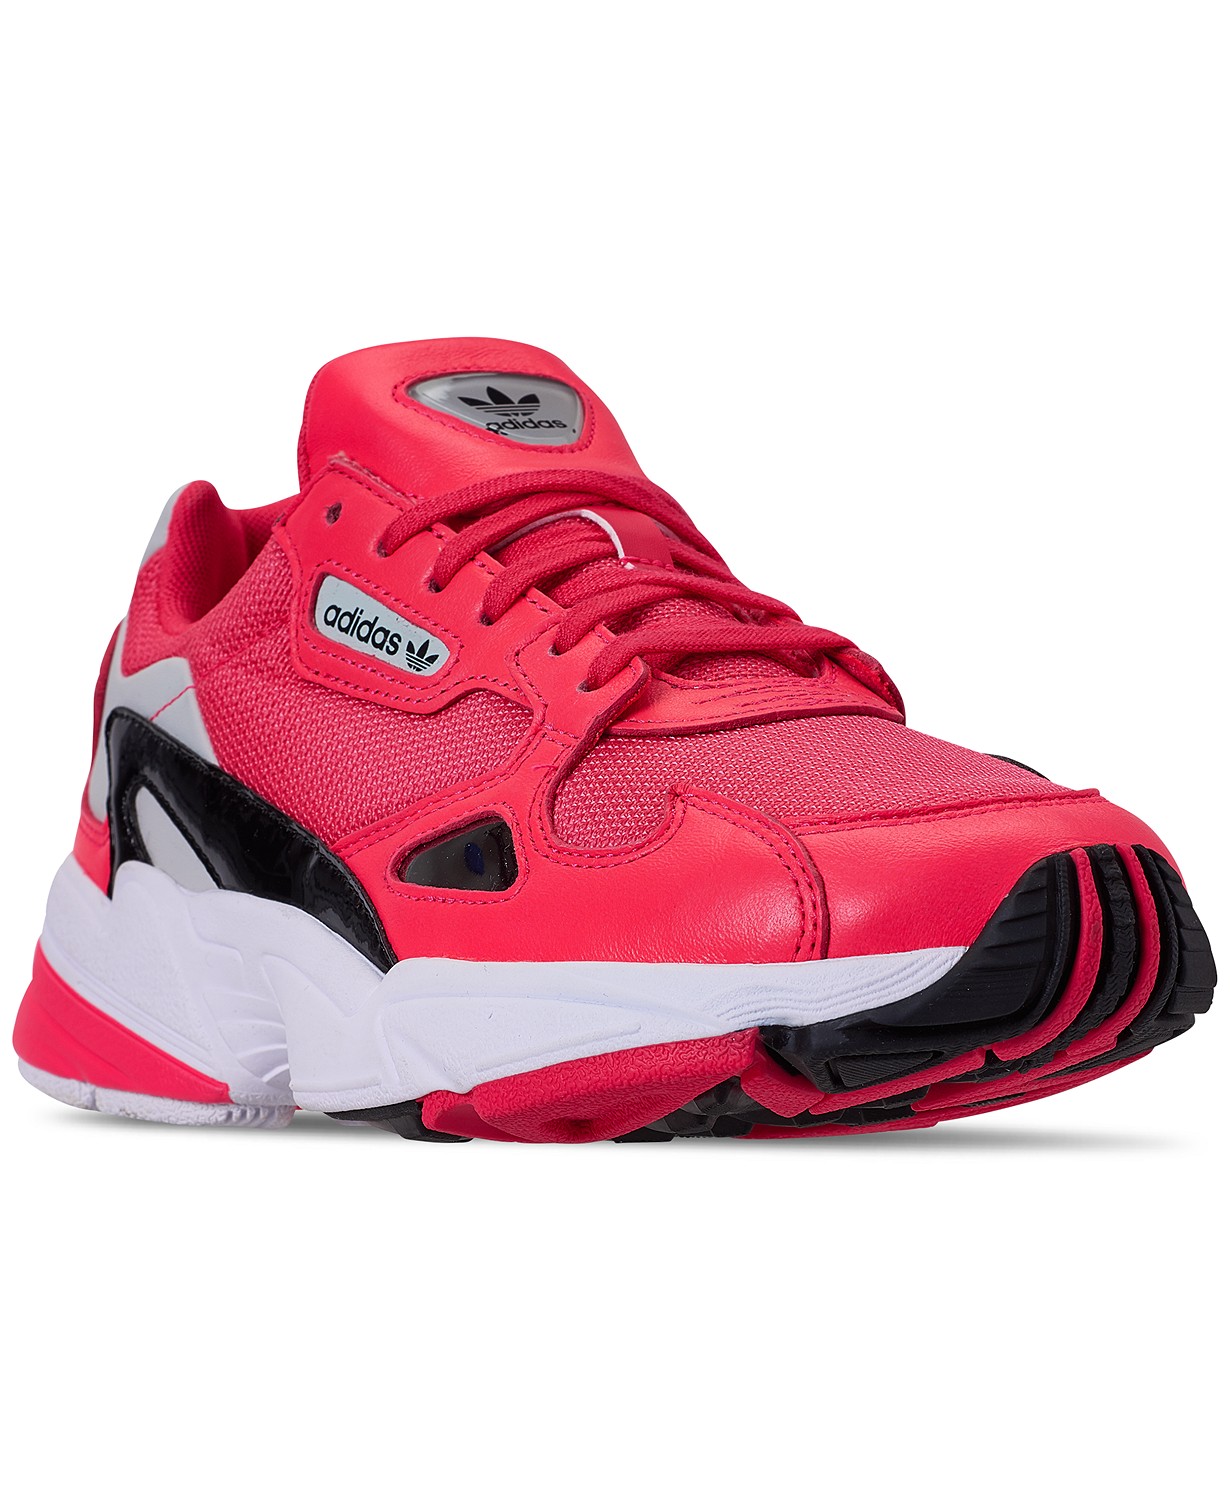 The adidas Falcon Gets a 'Shock Red 